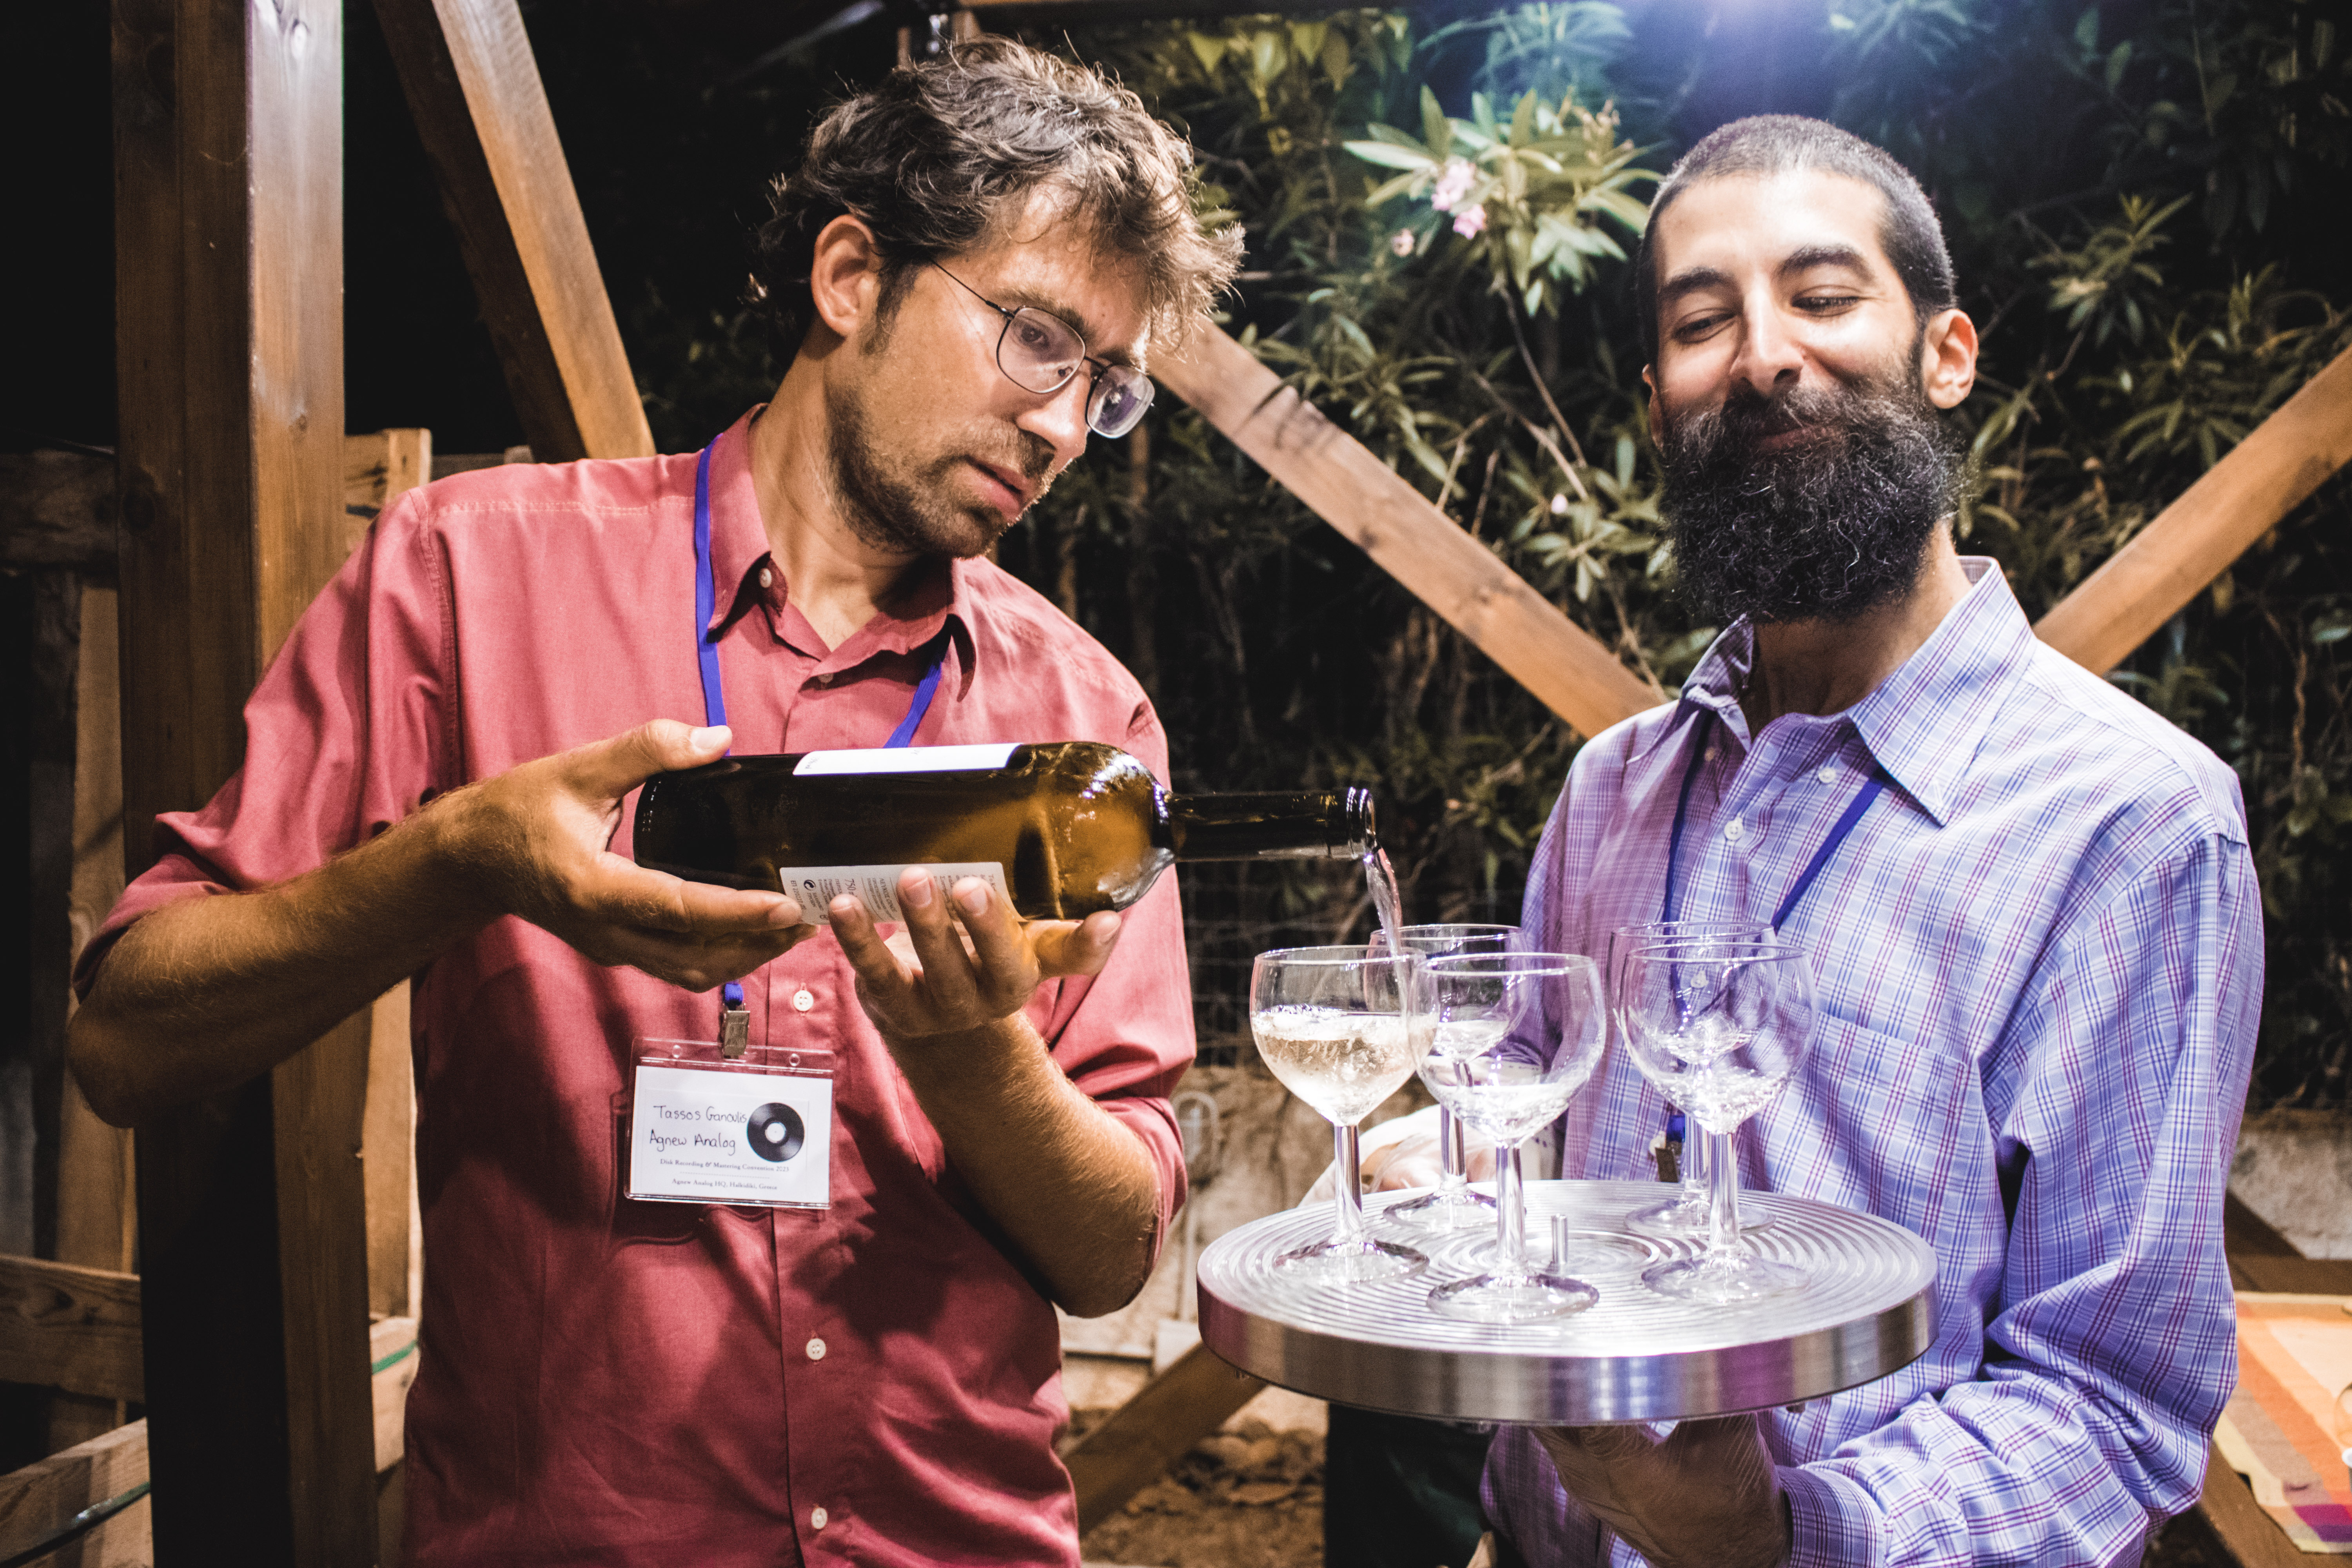 The hosts, Tassos Ganoulis and J. I. Agnew, serving fine local wine on a silver vacuum platter (Agnew Analog Type 6112).